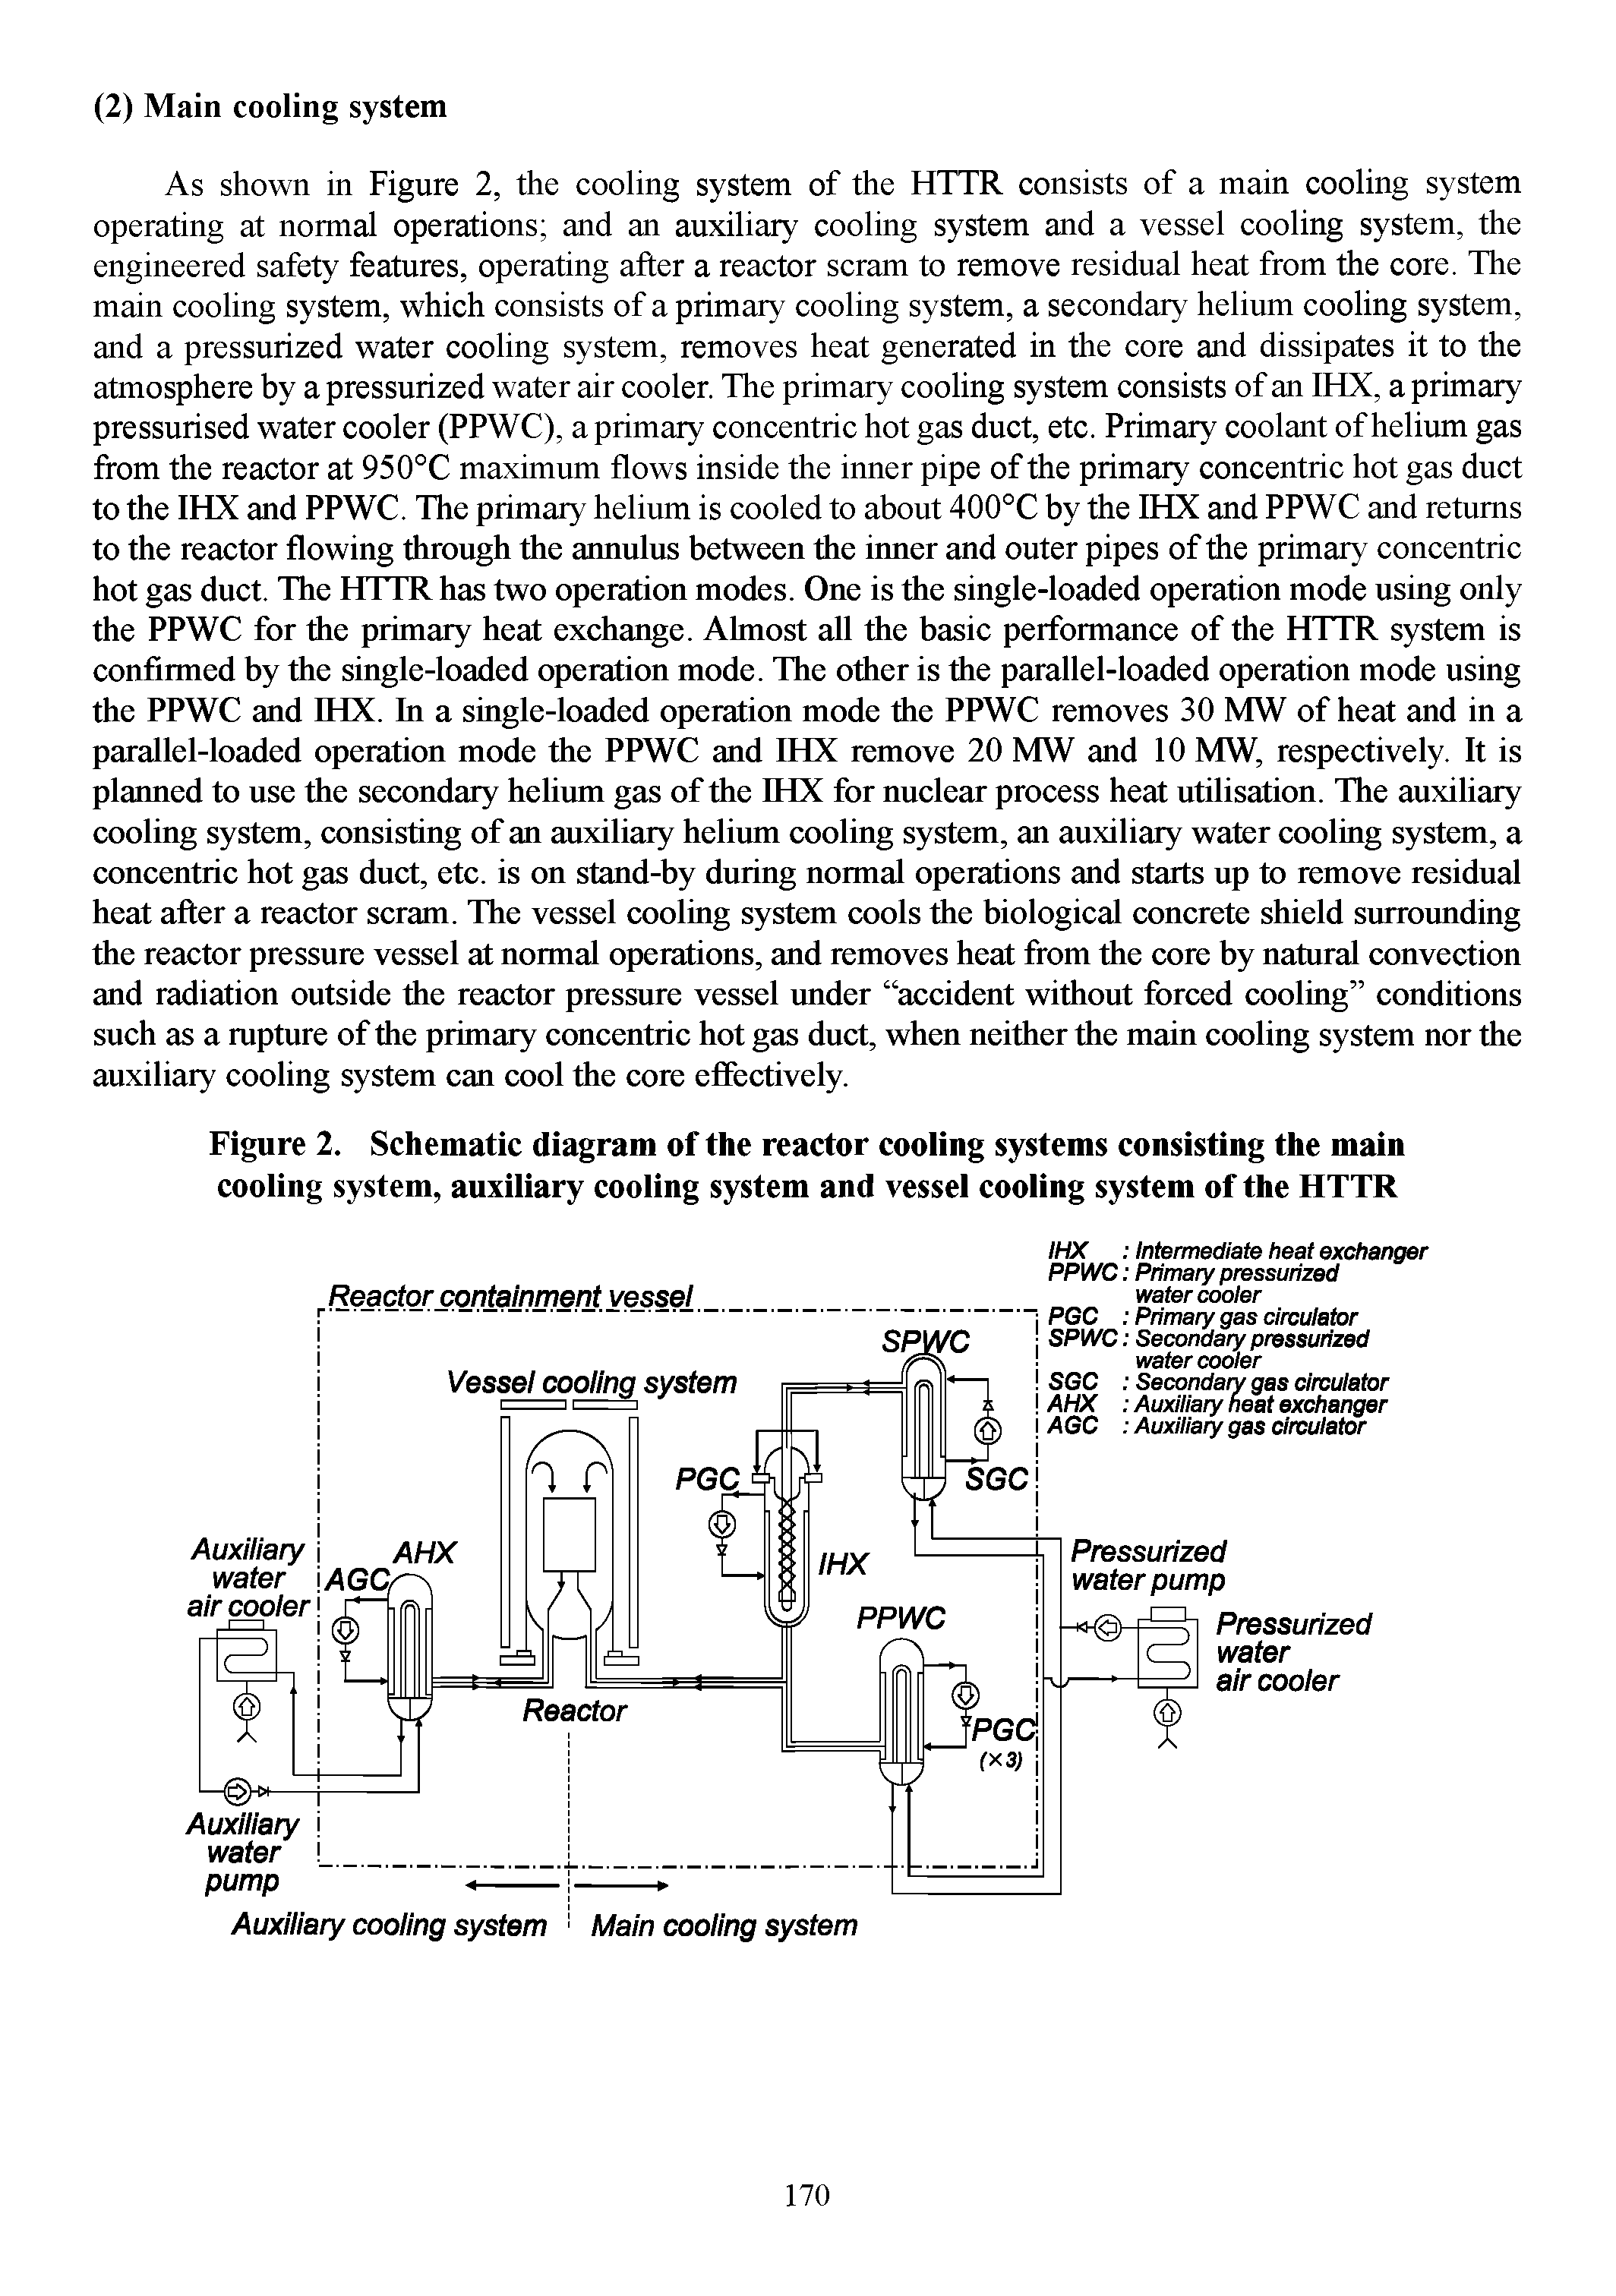 Figure 2. Schematic diagram of the reactor cooling systems consisting the main cooling system, auxiliary cooling system and vessel cooling system of the HTTR...